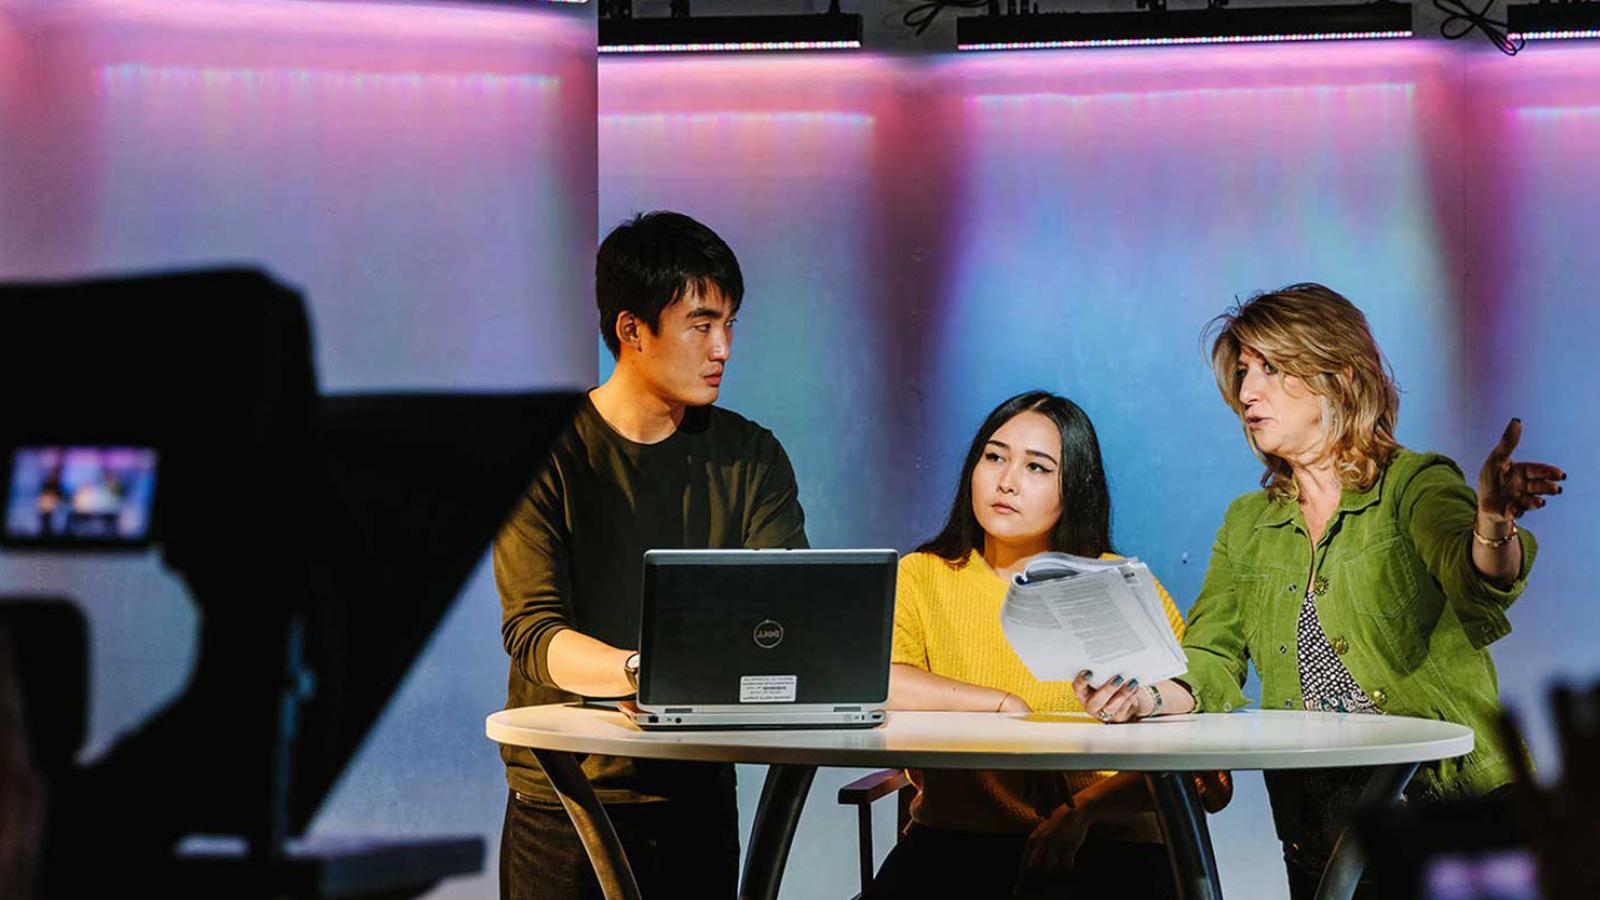 Students and professor working in a tv studio.